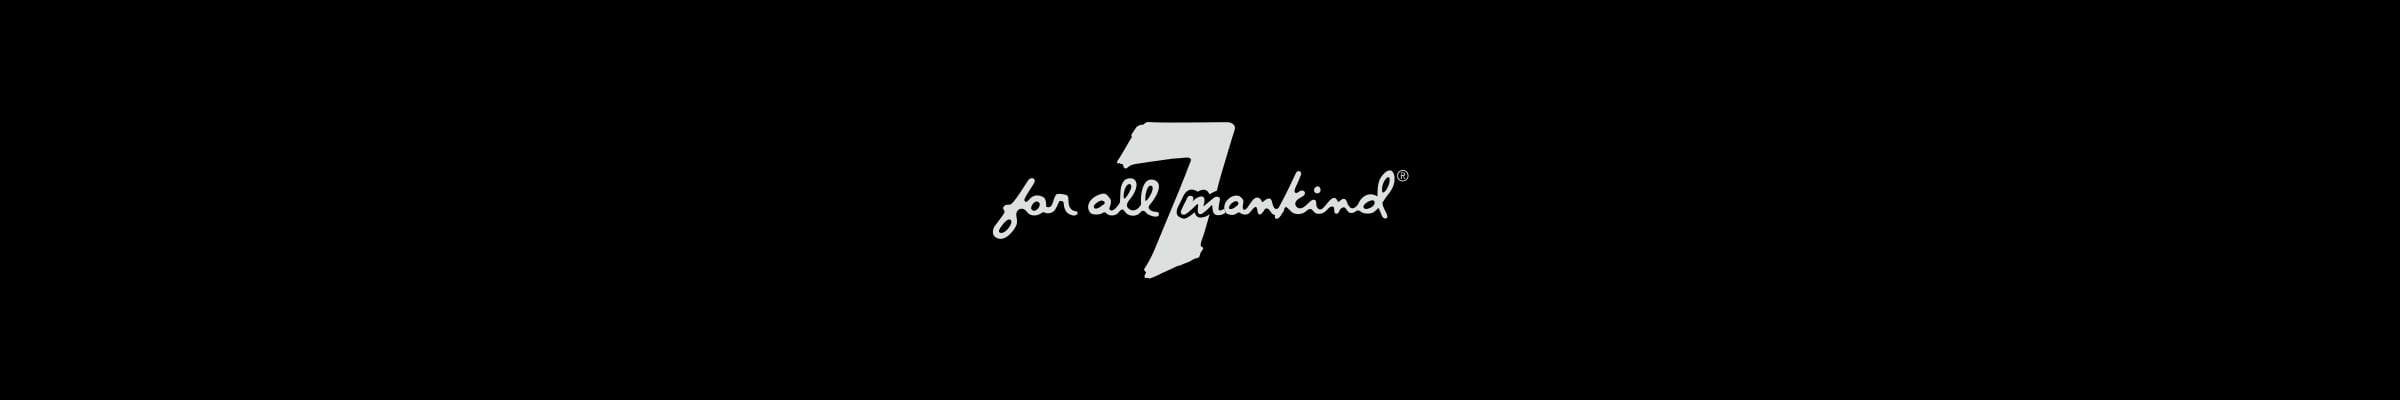 7-for-all-mankind-banner